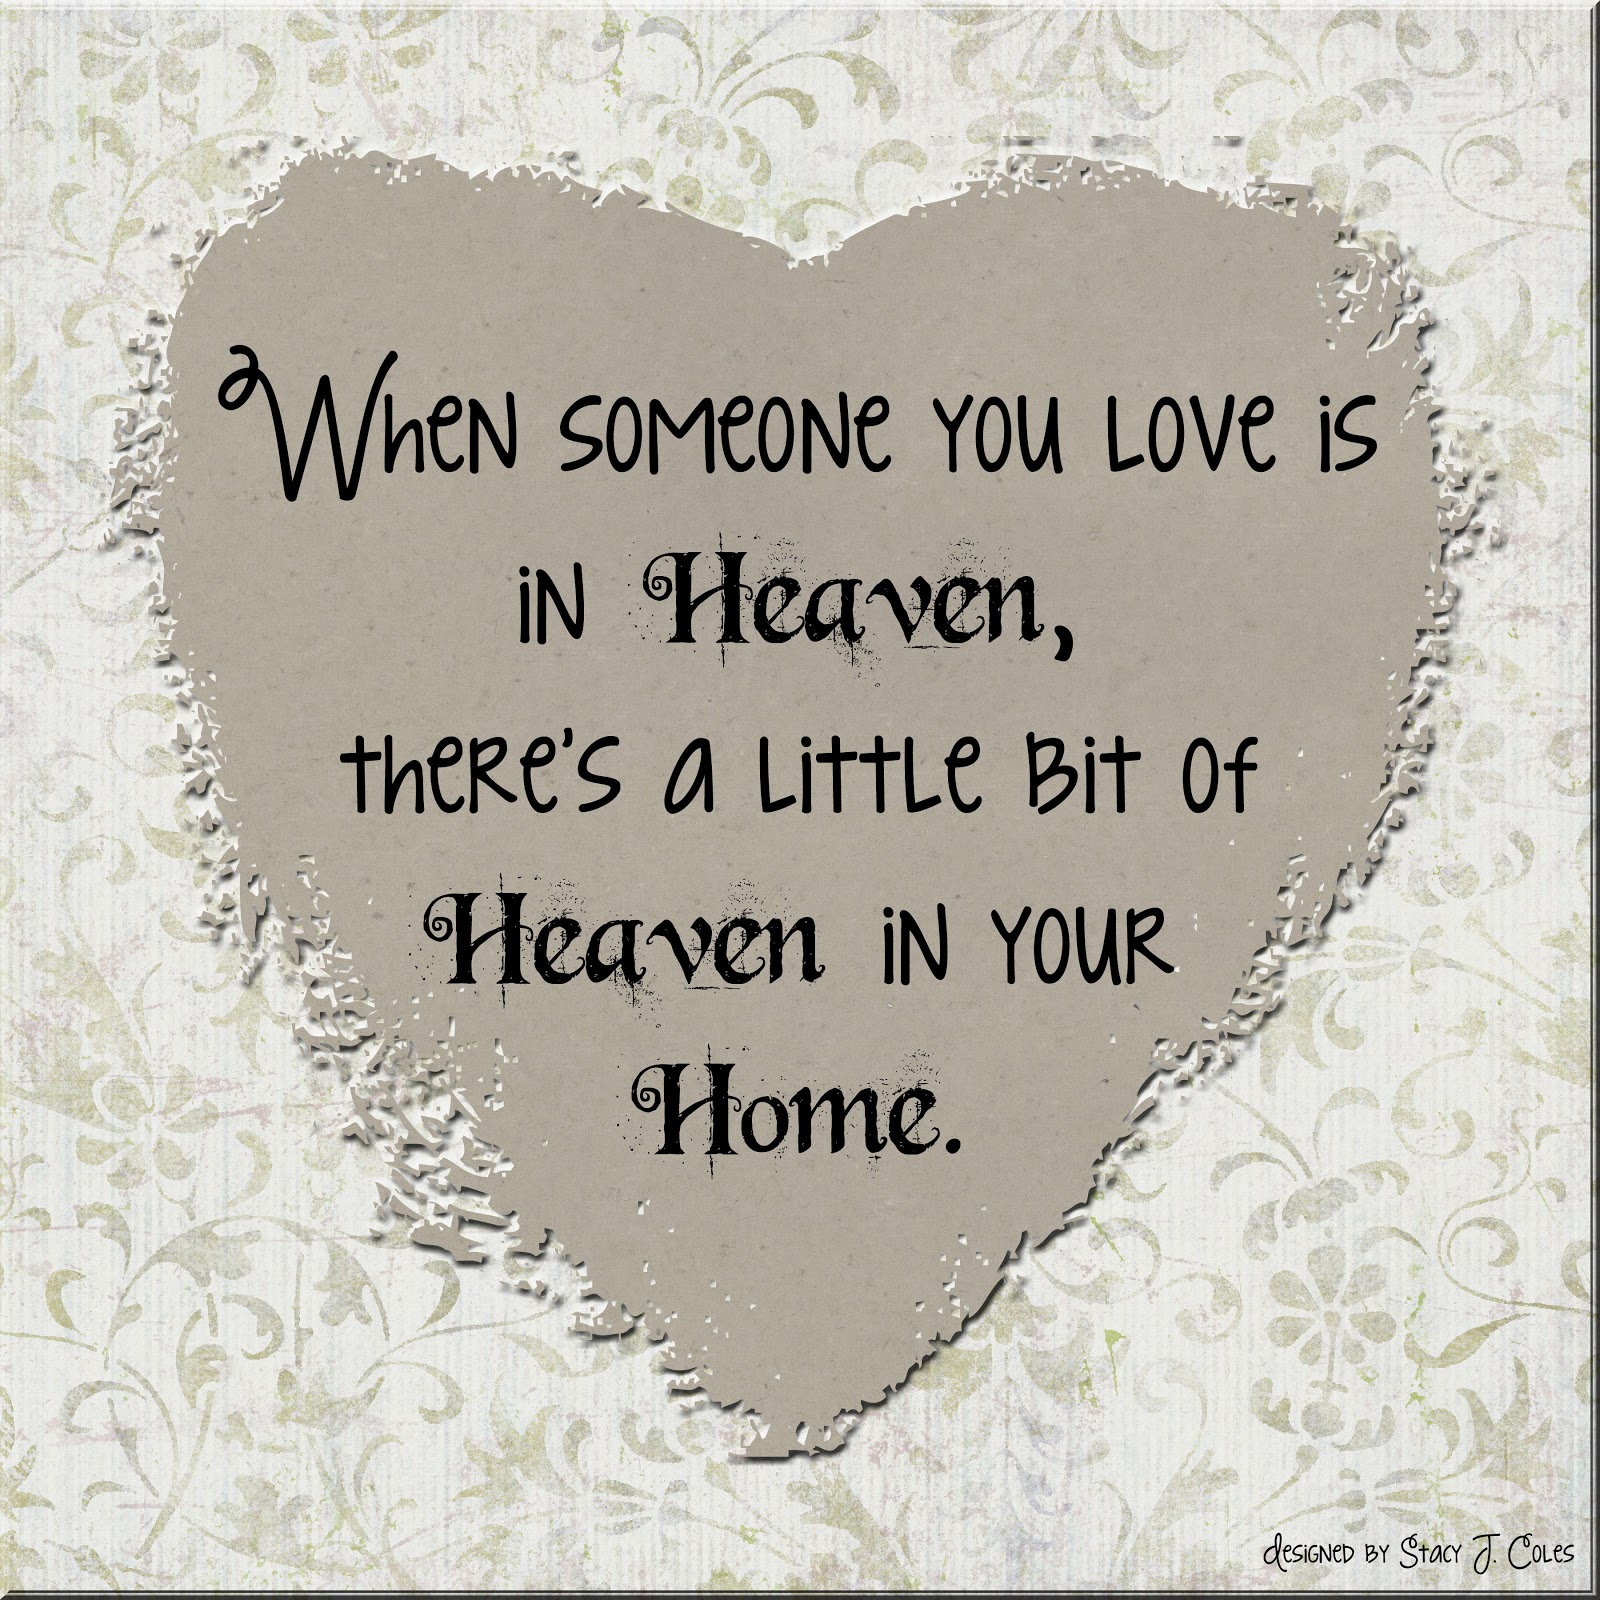 Missing Dad In Heaven Quotes / Missing Father In Heaven Quotes. QuotesGram : Christmas is a time of joy, but now without you dad, memories surround us and it's easy to be sad.